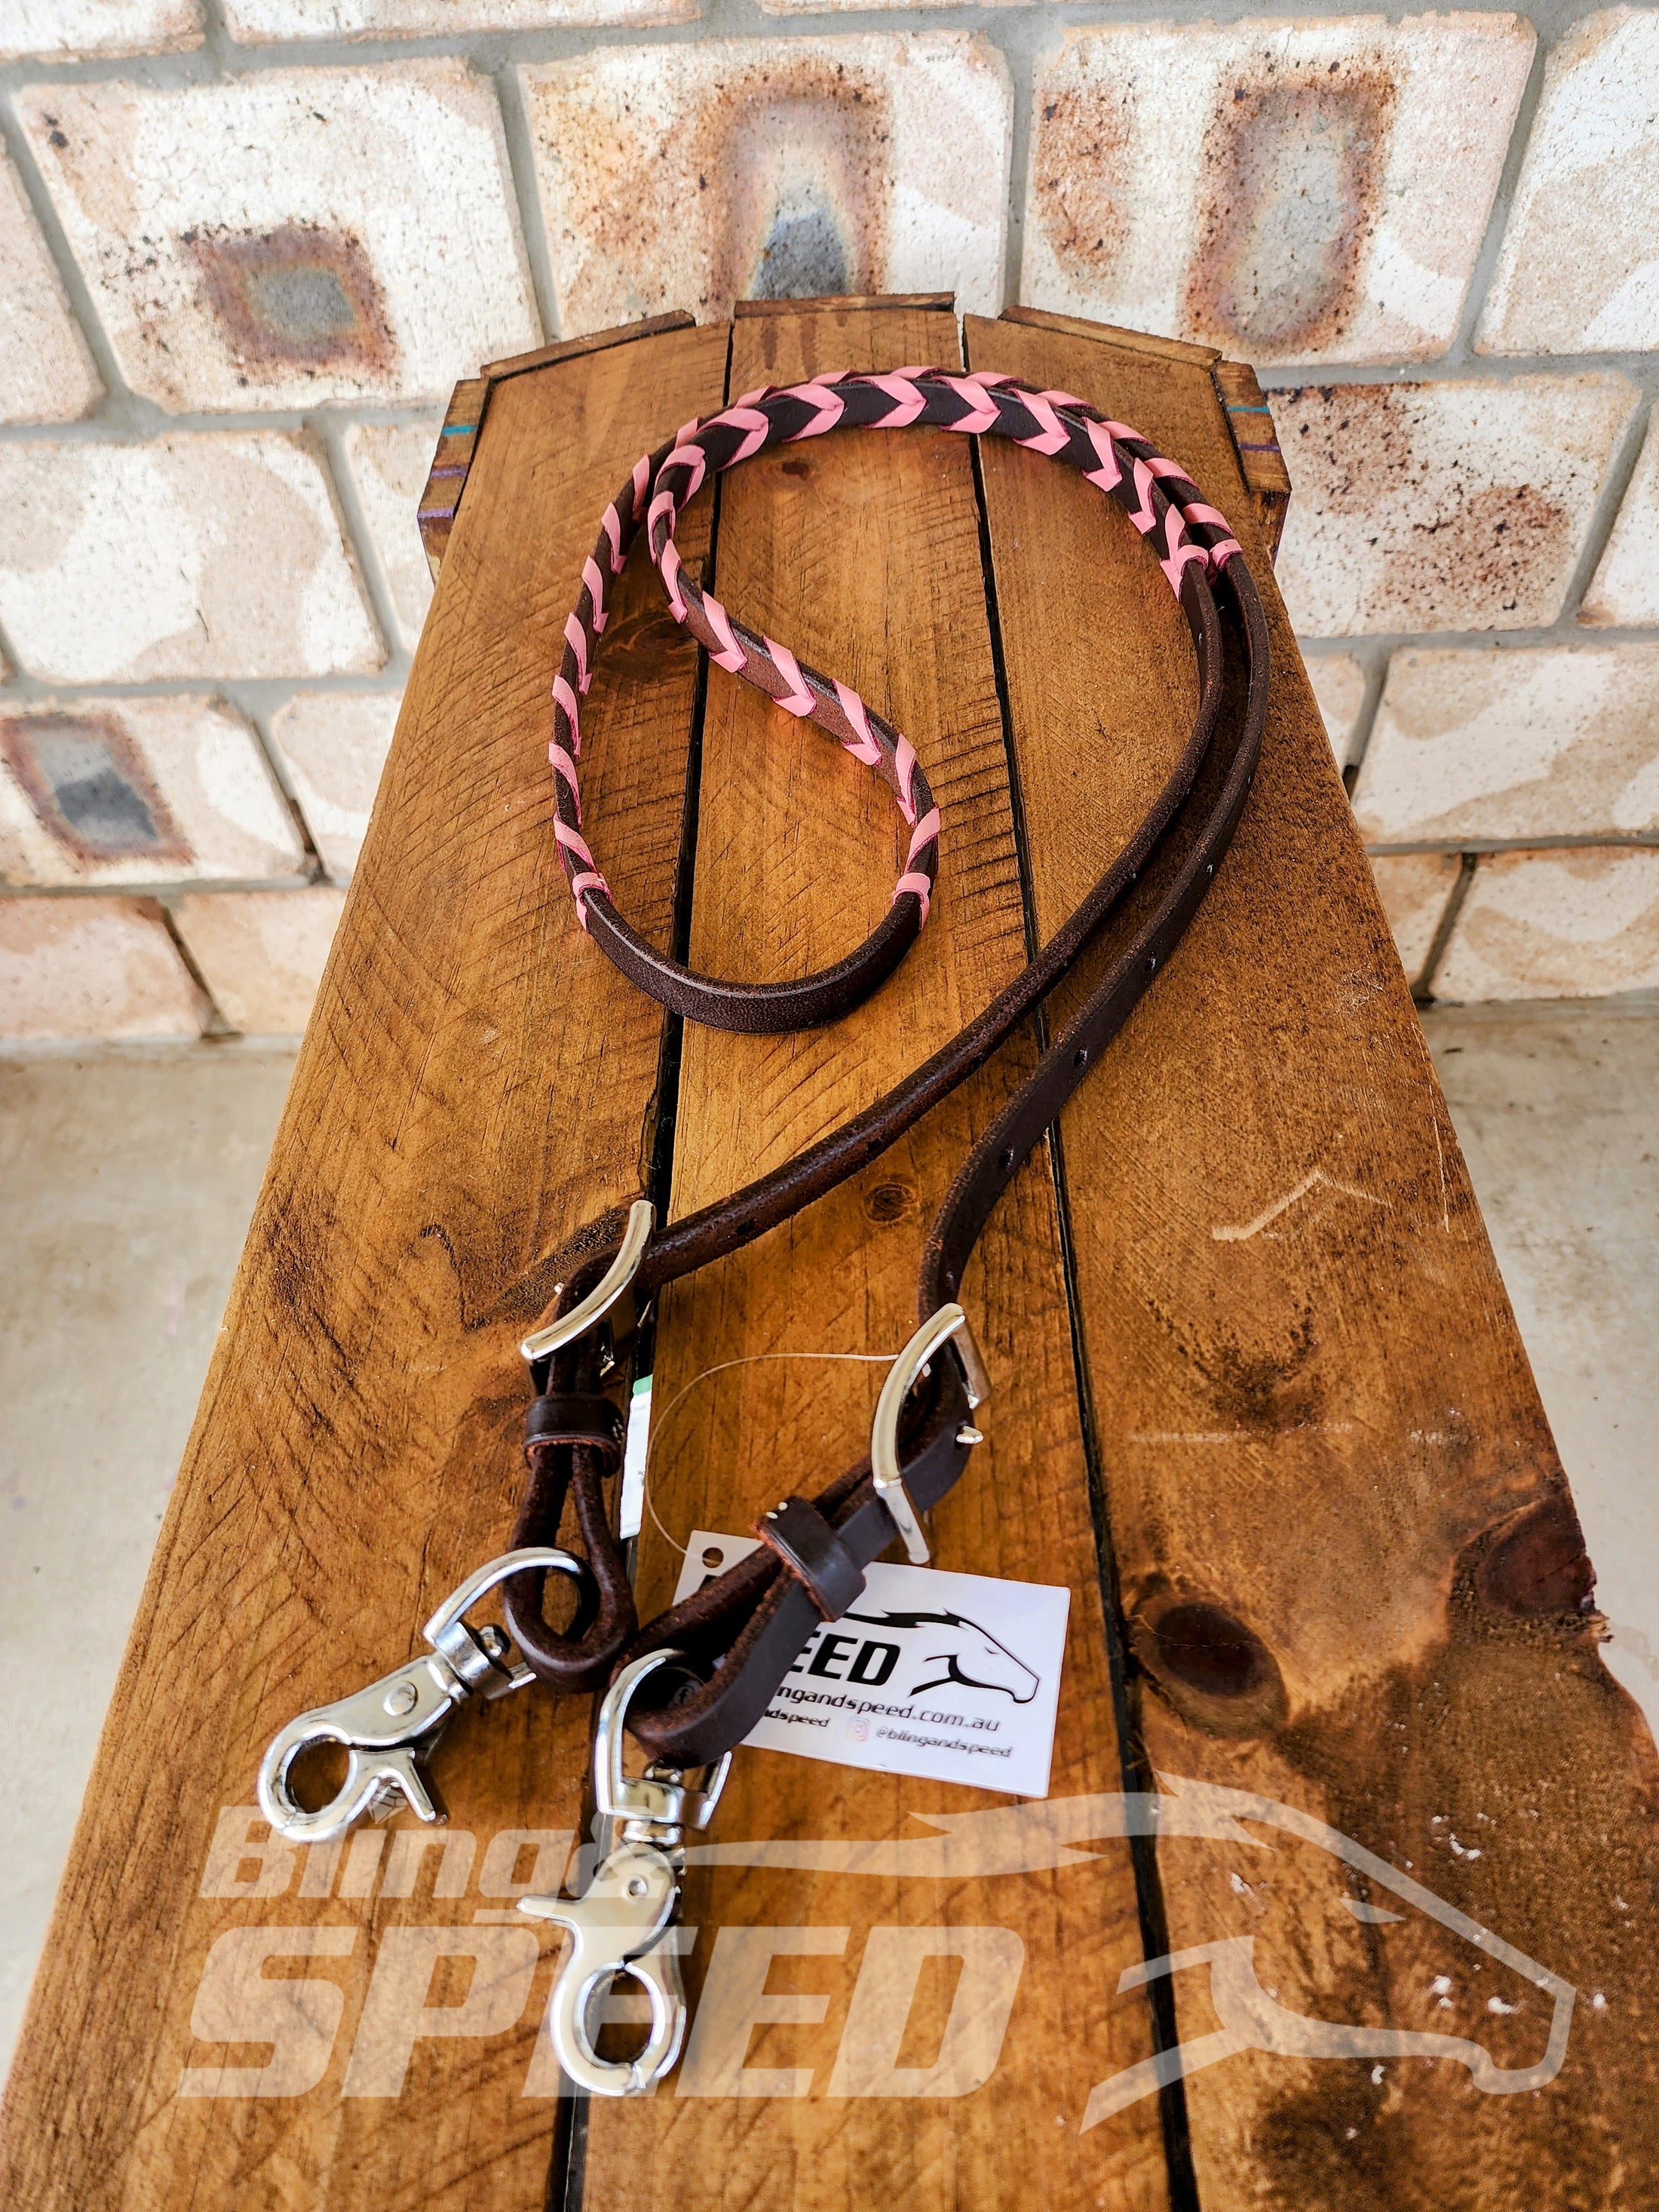 Bling and Speed Pink Laced Barrel Reins (7873220411630)